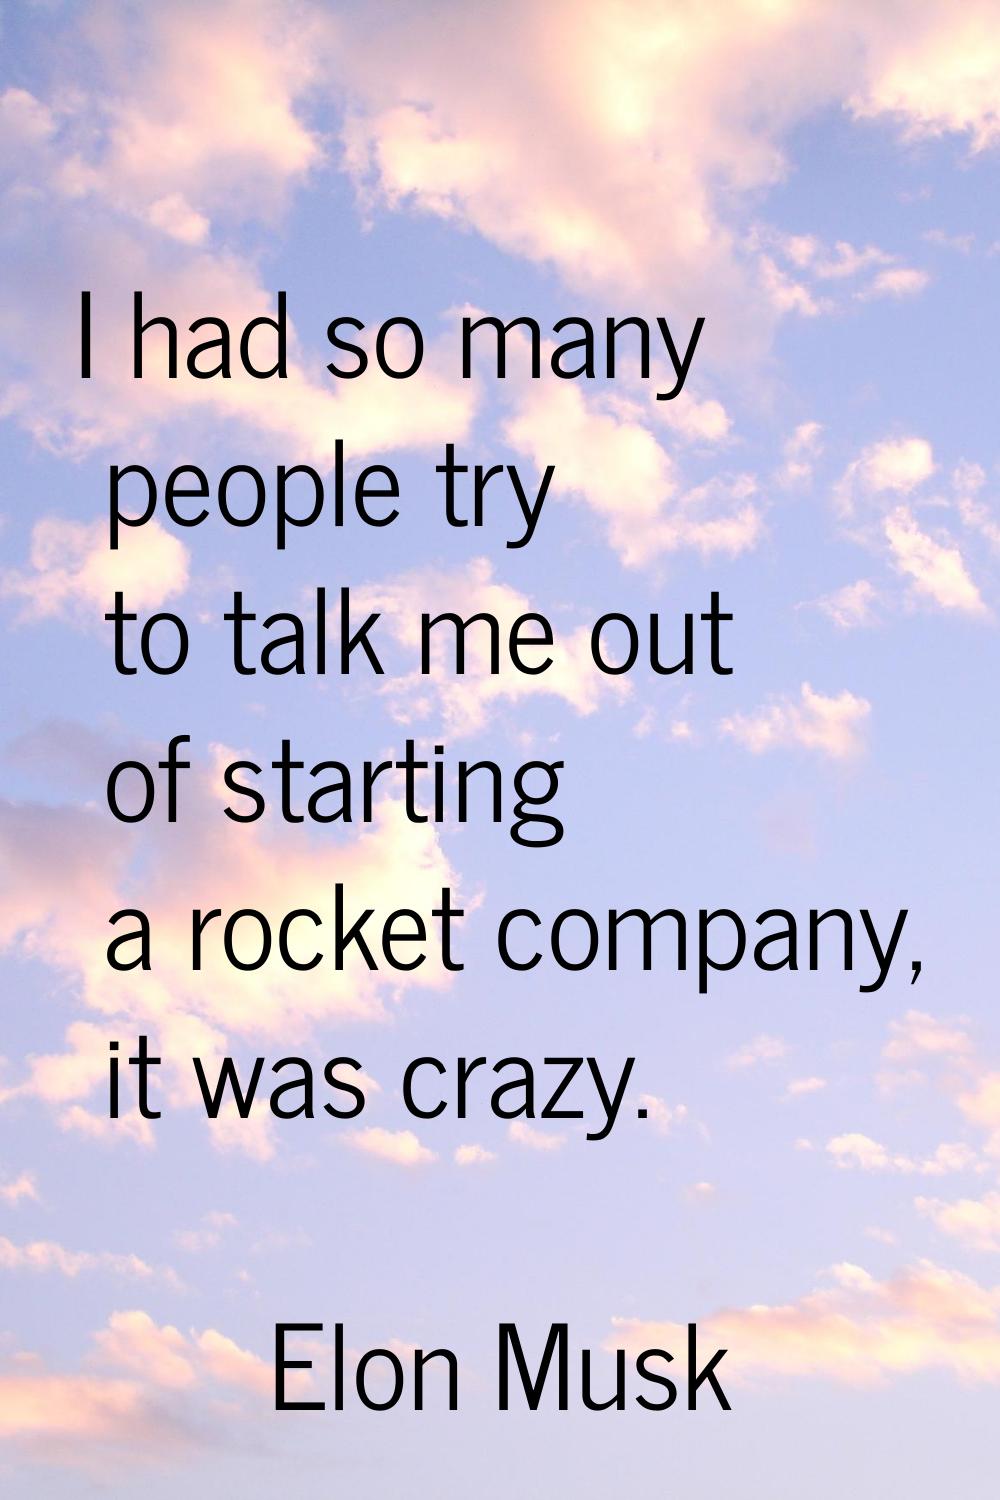 I had so many people try to talk me out of starting a rocket company, it was crazy.